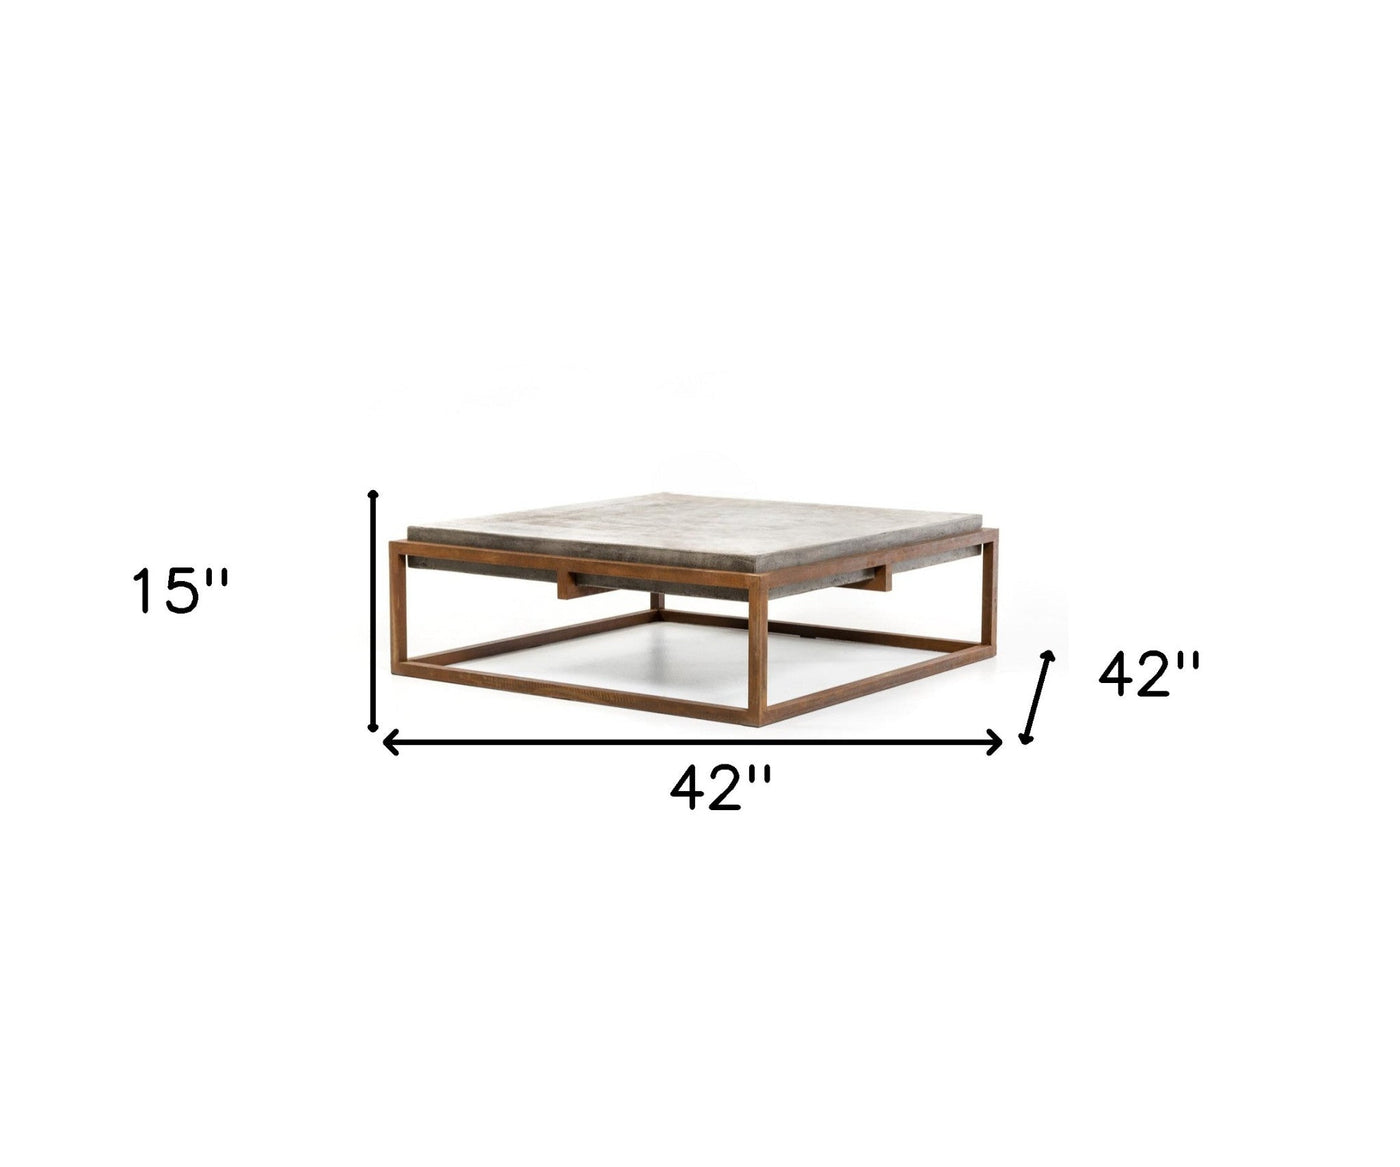 15’ Concrete And Metal Coffee Table - Coffee Tables